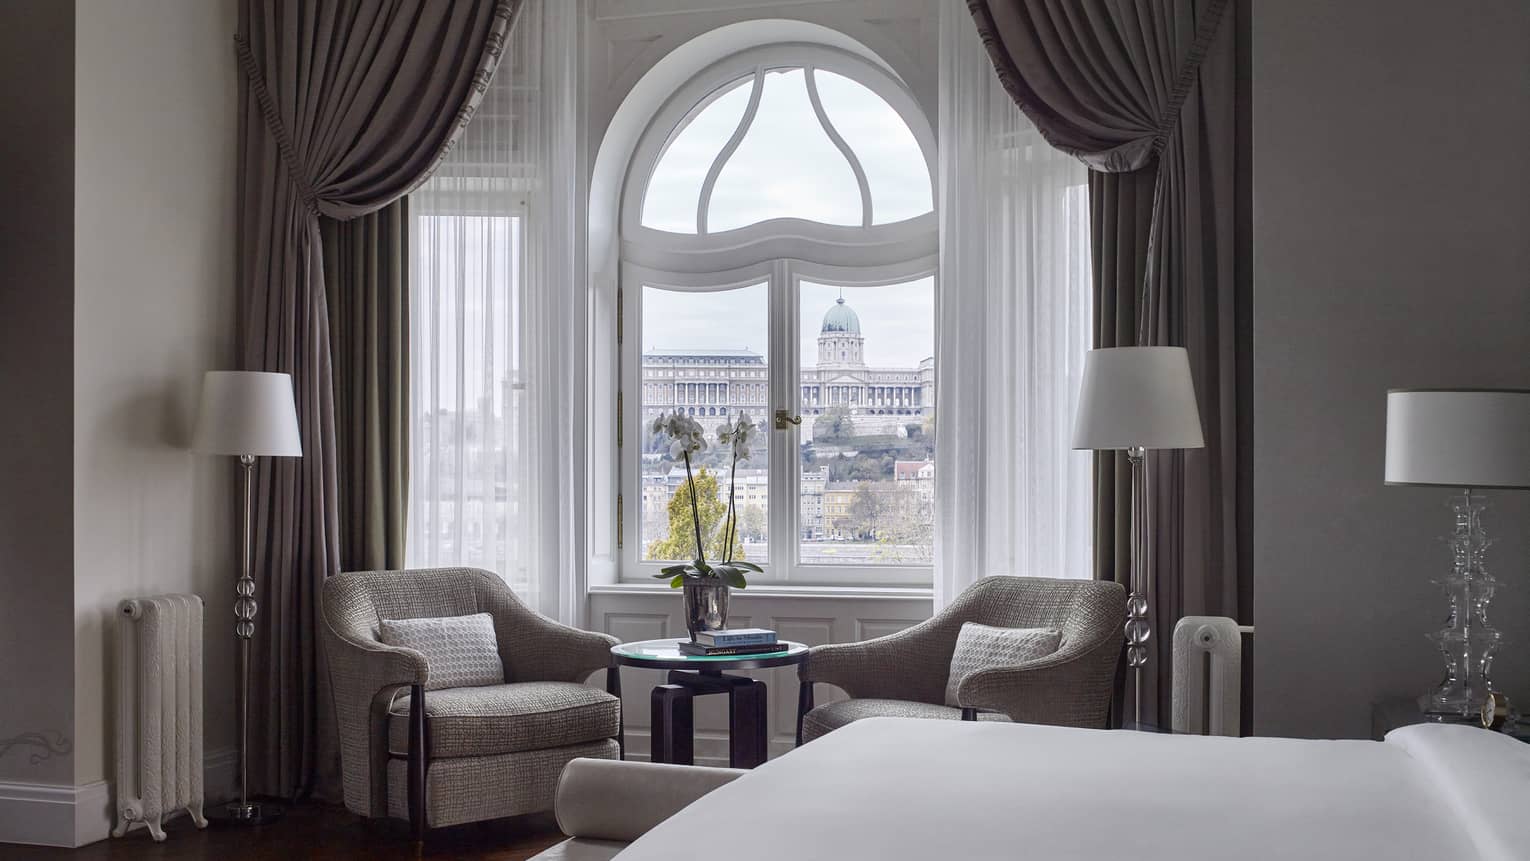 Buda Castle Presidential Suite is furnished with a two sitting chairs next to a curved window, lamps, a large bed and gray curtains. 